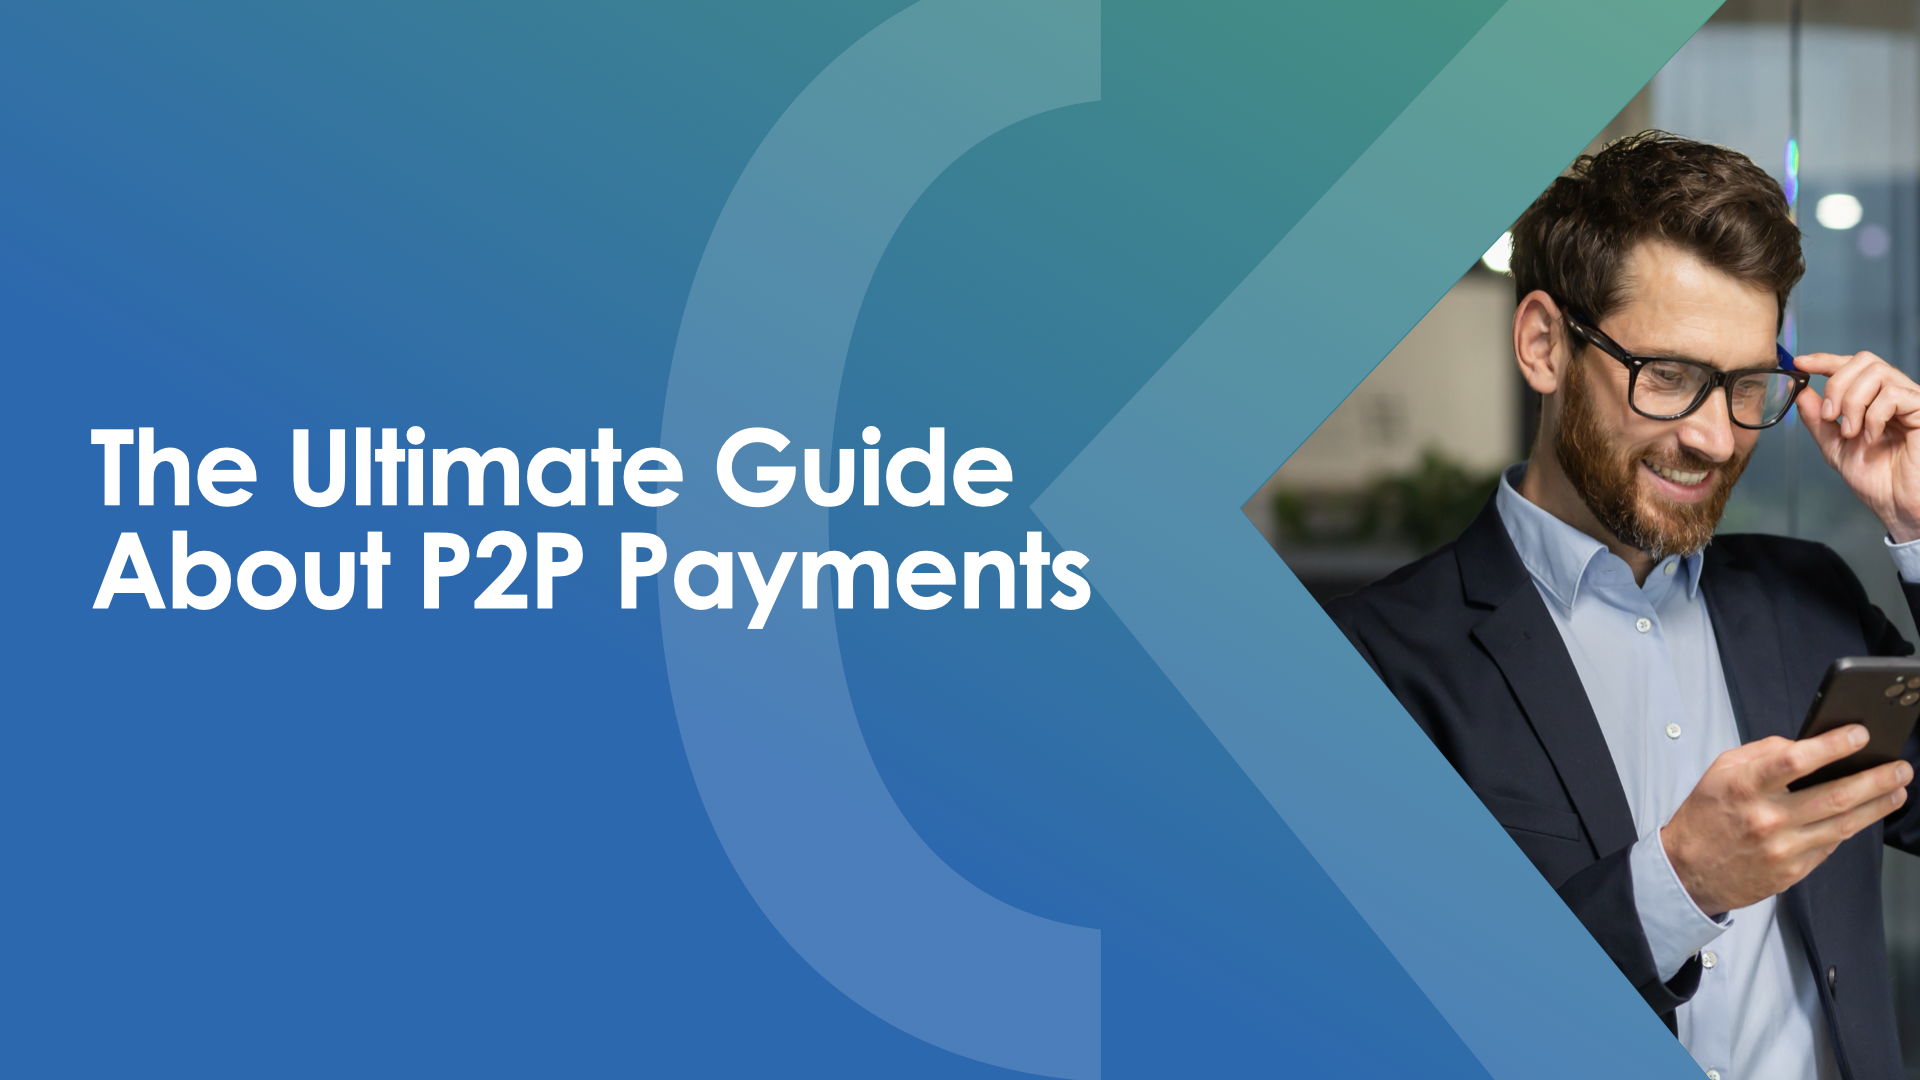 The Ultimate Guide About P2P Payments